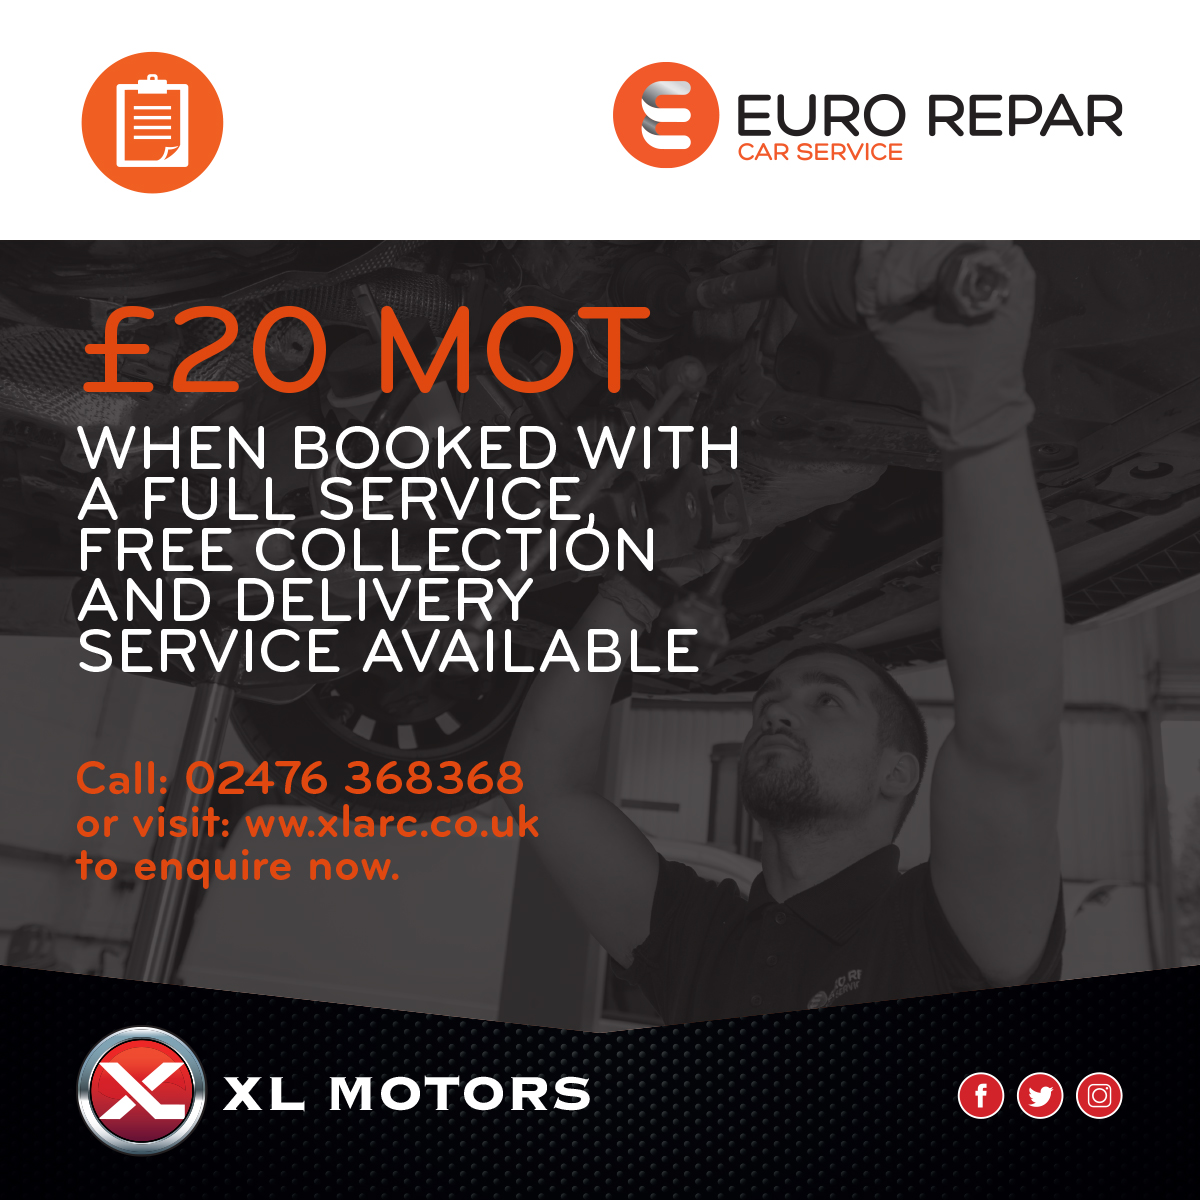 🚗 £20  MOT🚘when booked with a full service Call 02476 368368 to book your appointment, FREE collection & delivery available, following strict social distancing  xlarc.co.uk #MOT #service #coventry #stayalert #freecollection #freedelivery